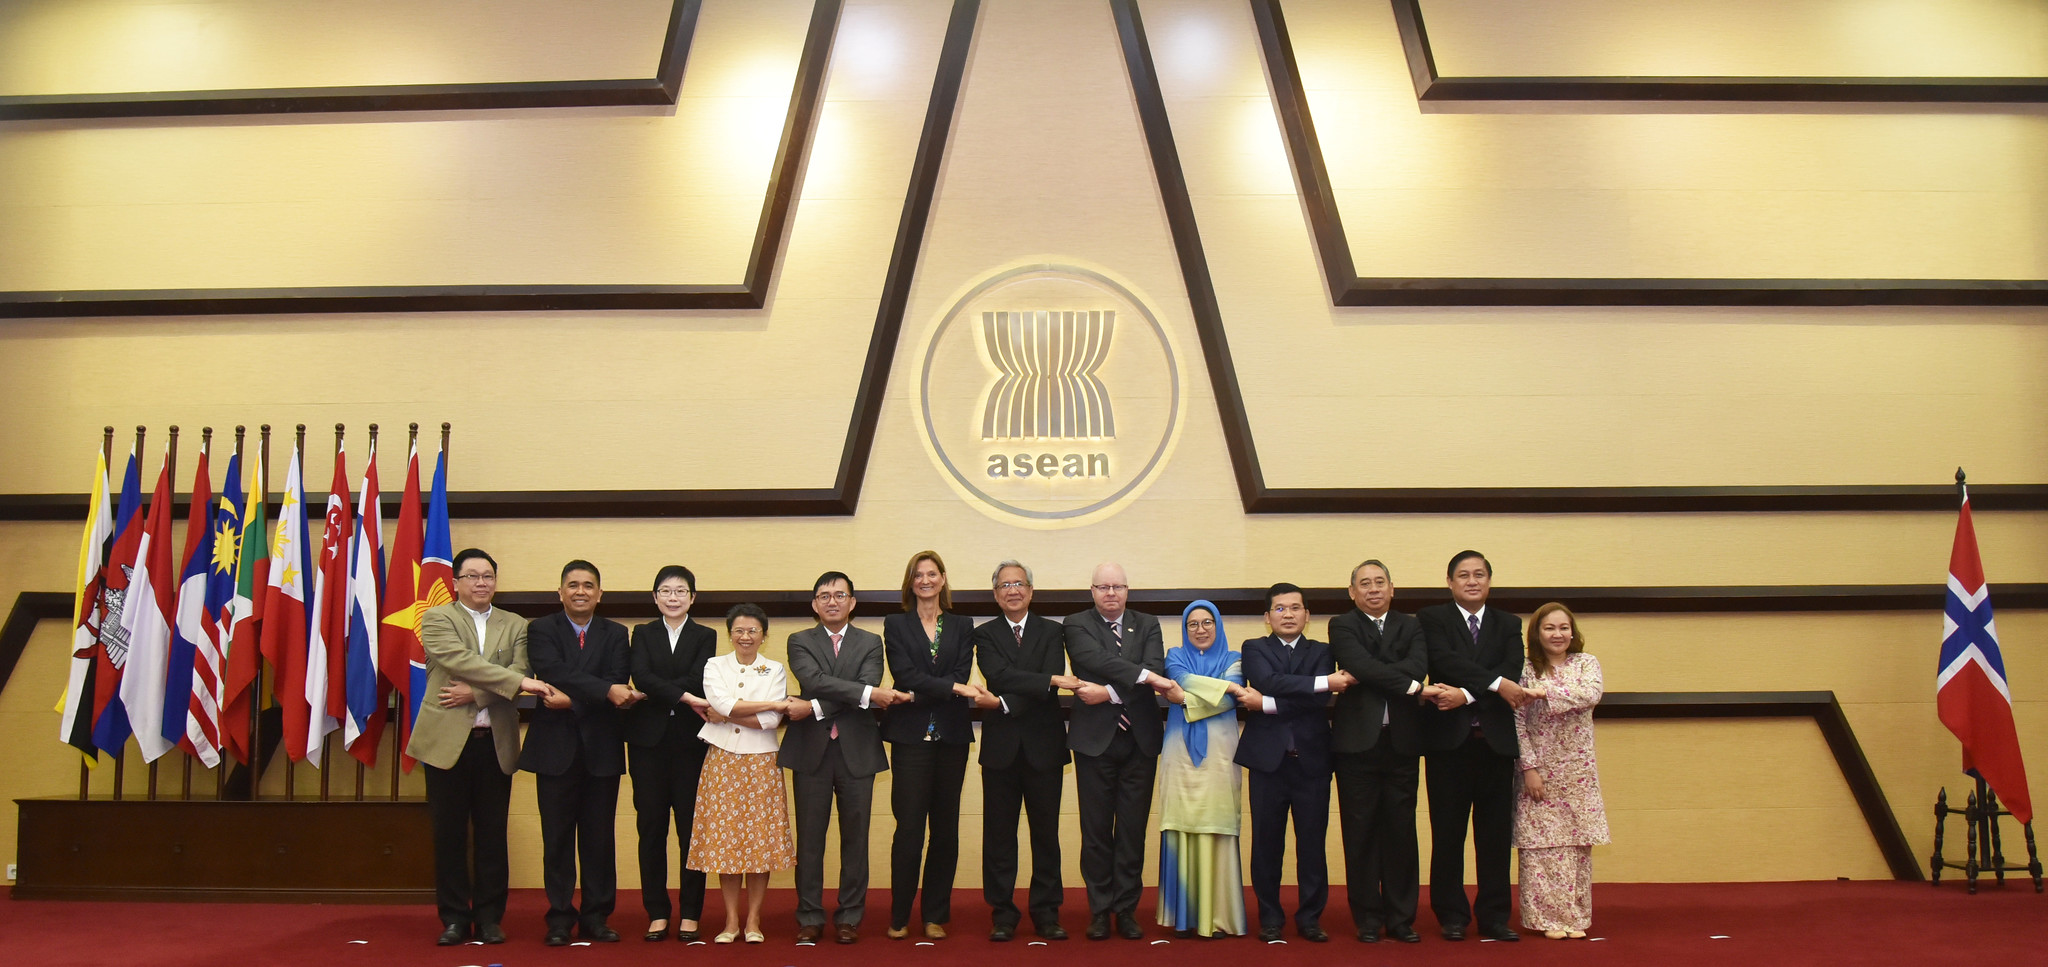 Norway's Ambassador to ASEAN reflects on Vietnam as ASEAN's Chairman